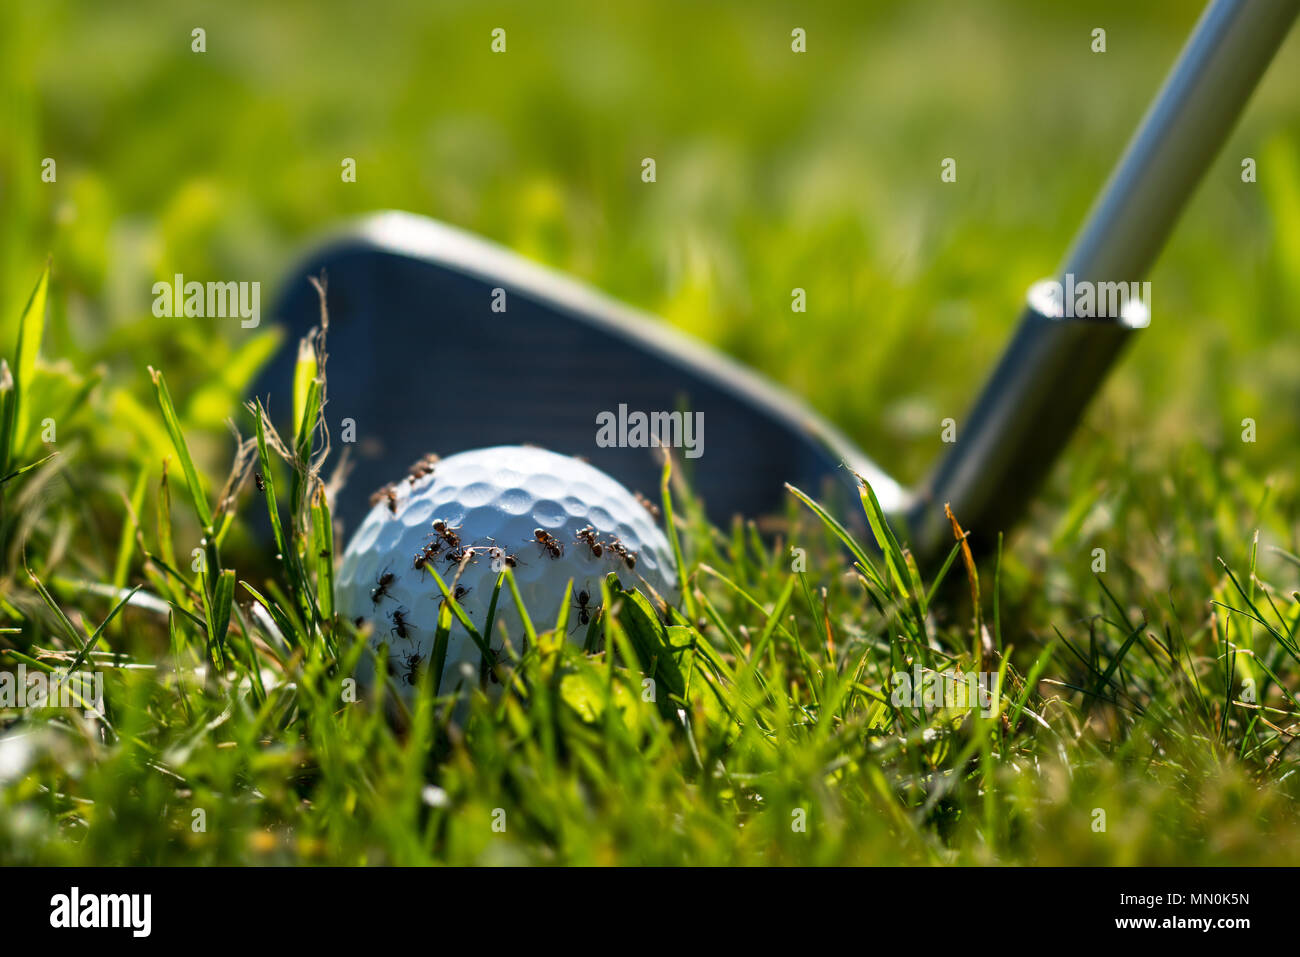 Ants on a golf ball and a golf club behind Stock Photo